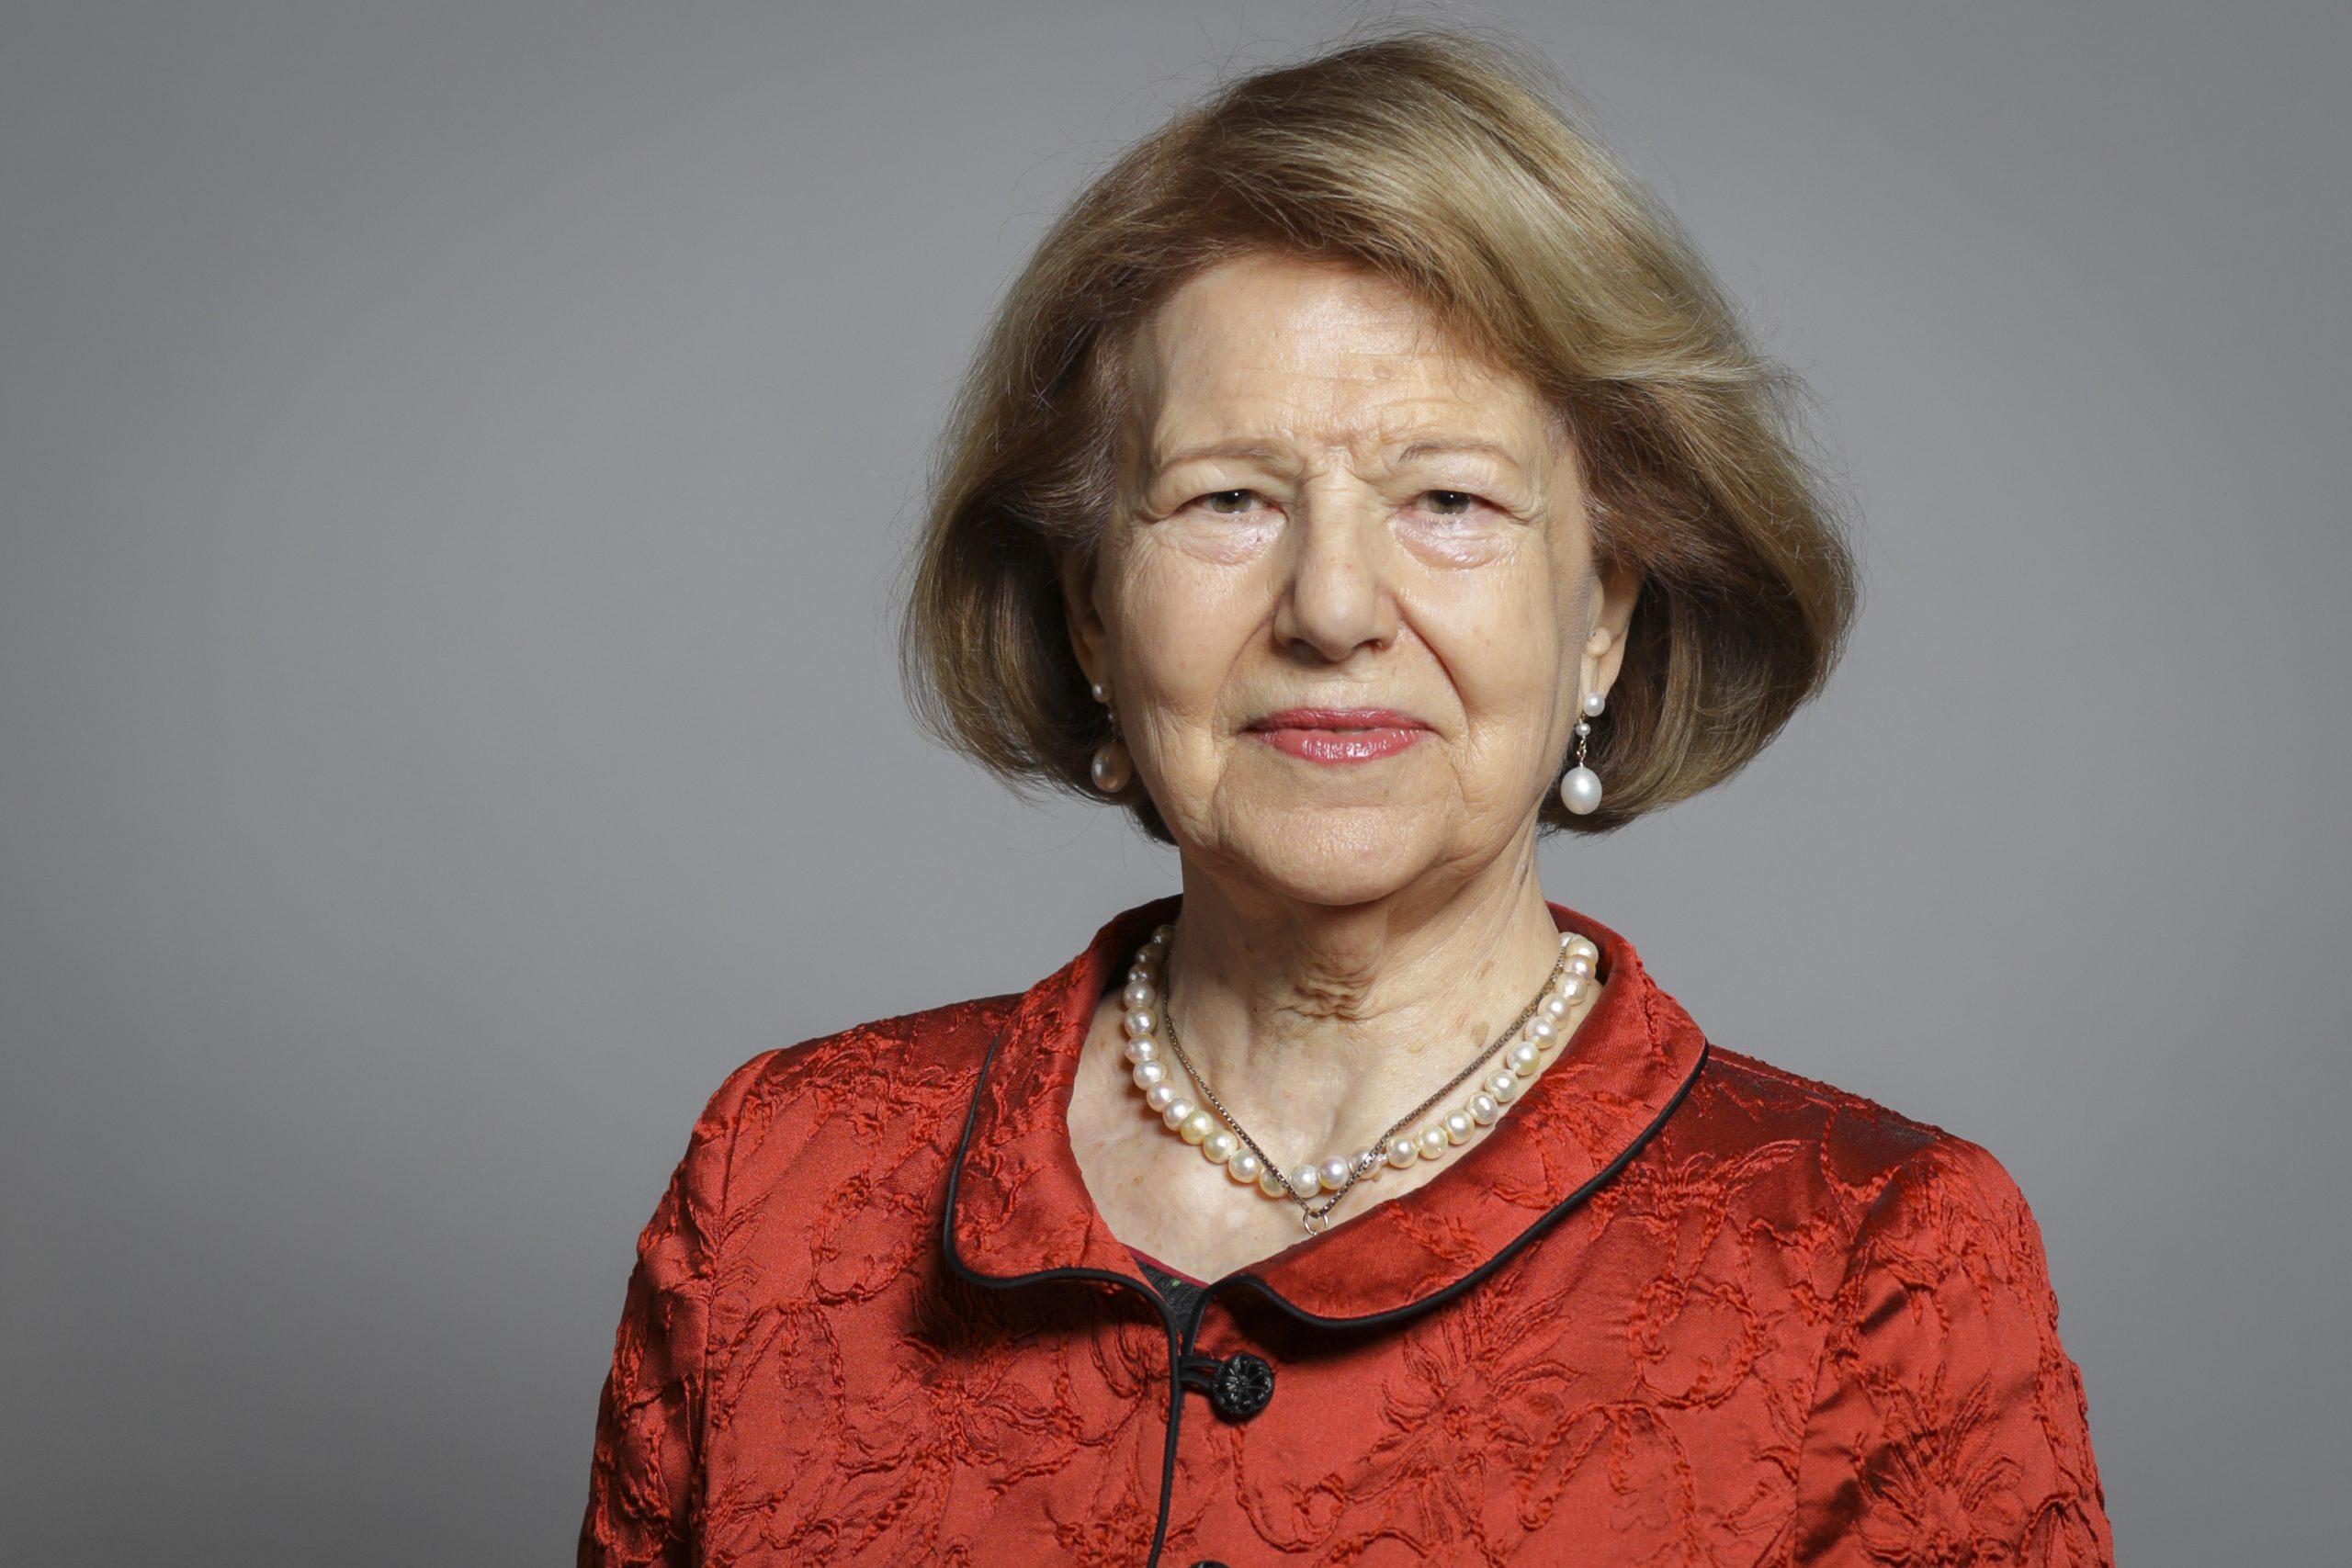 Official portrait of Baroness Nicholson of Winterbourne.